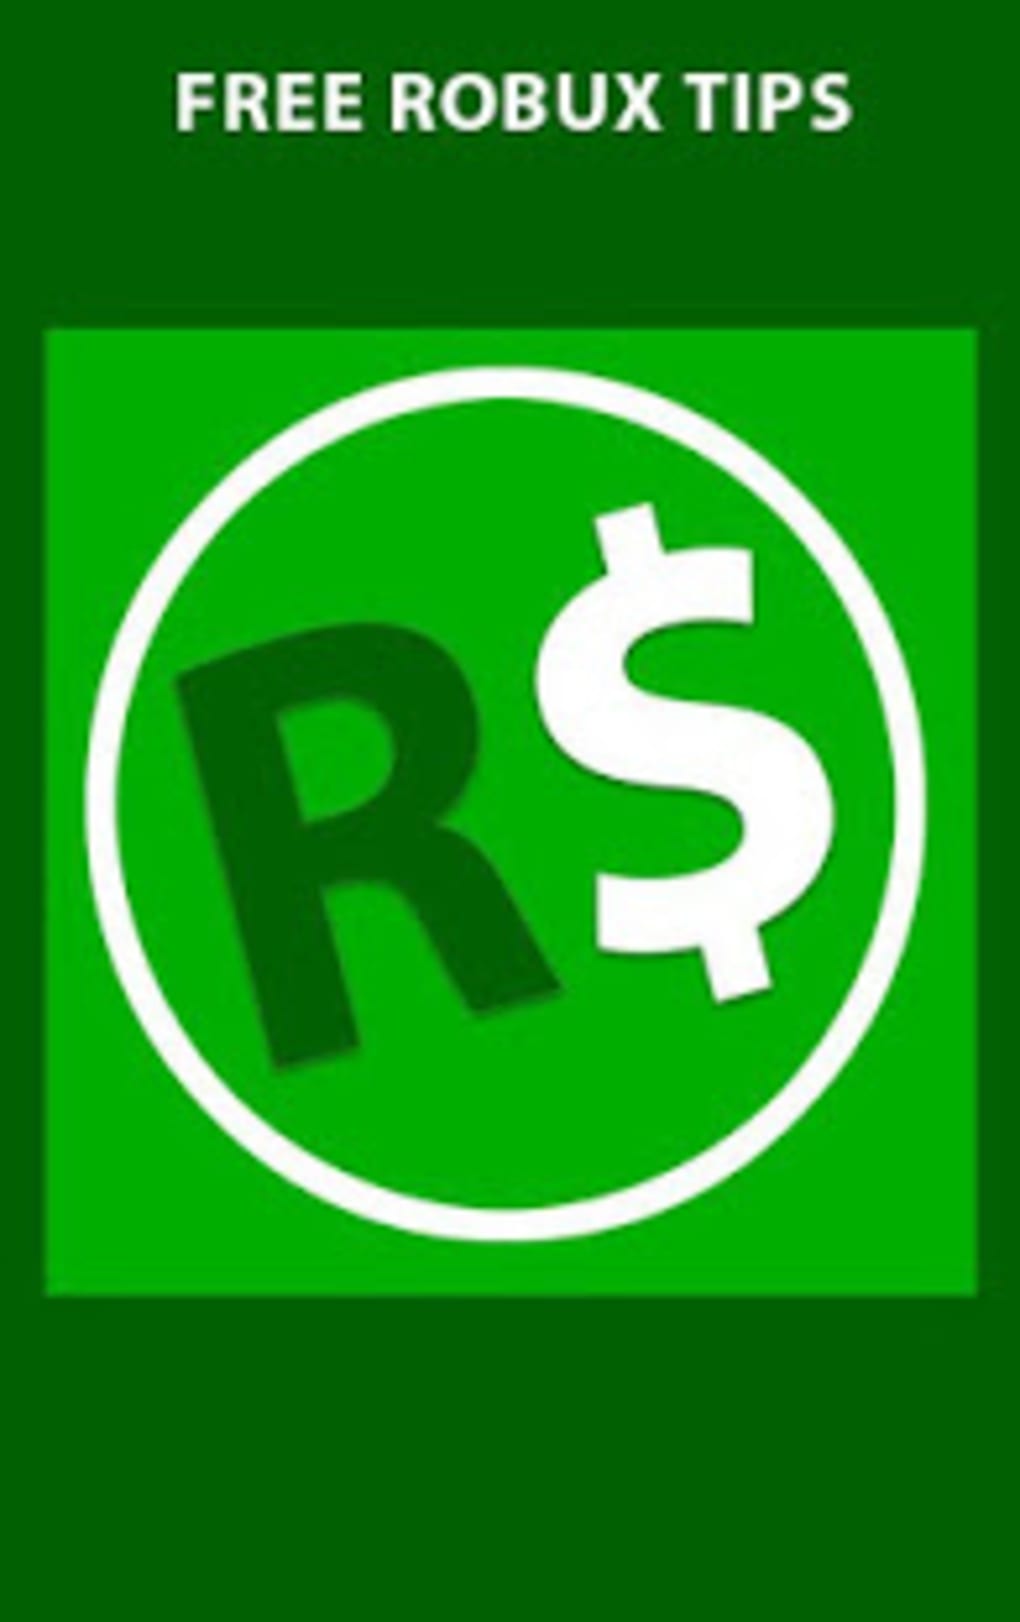 Free Robux Lucky Patcher - roblox robux lucky patcher